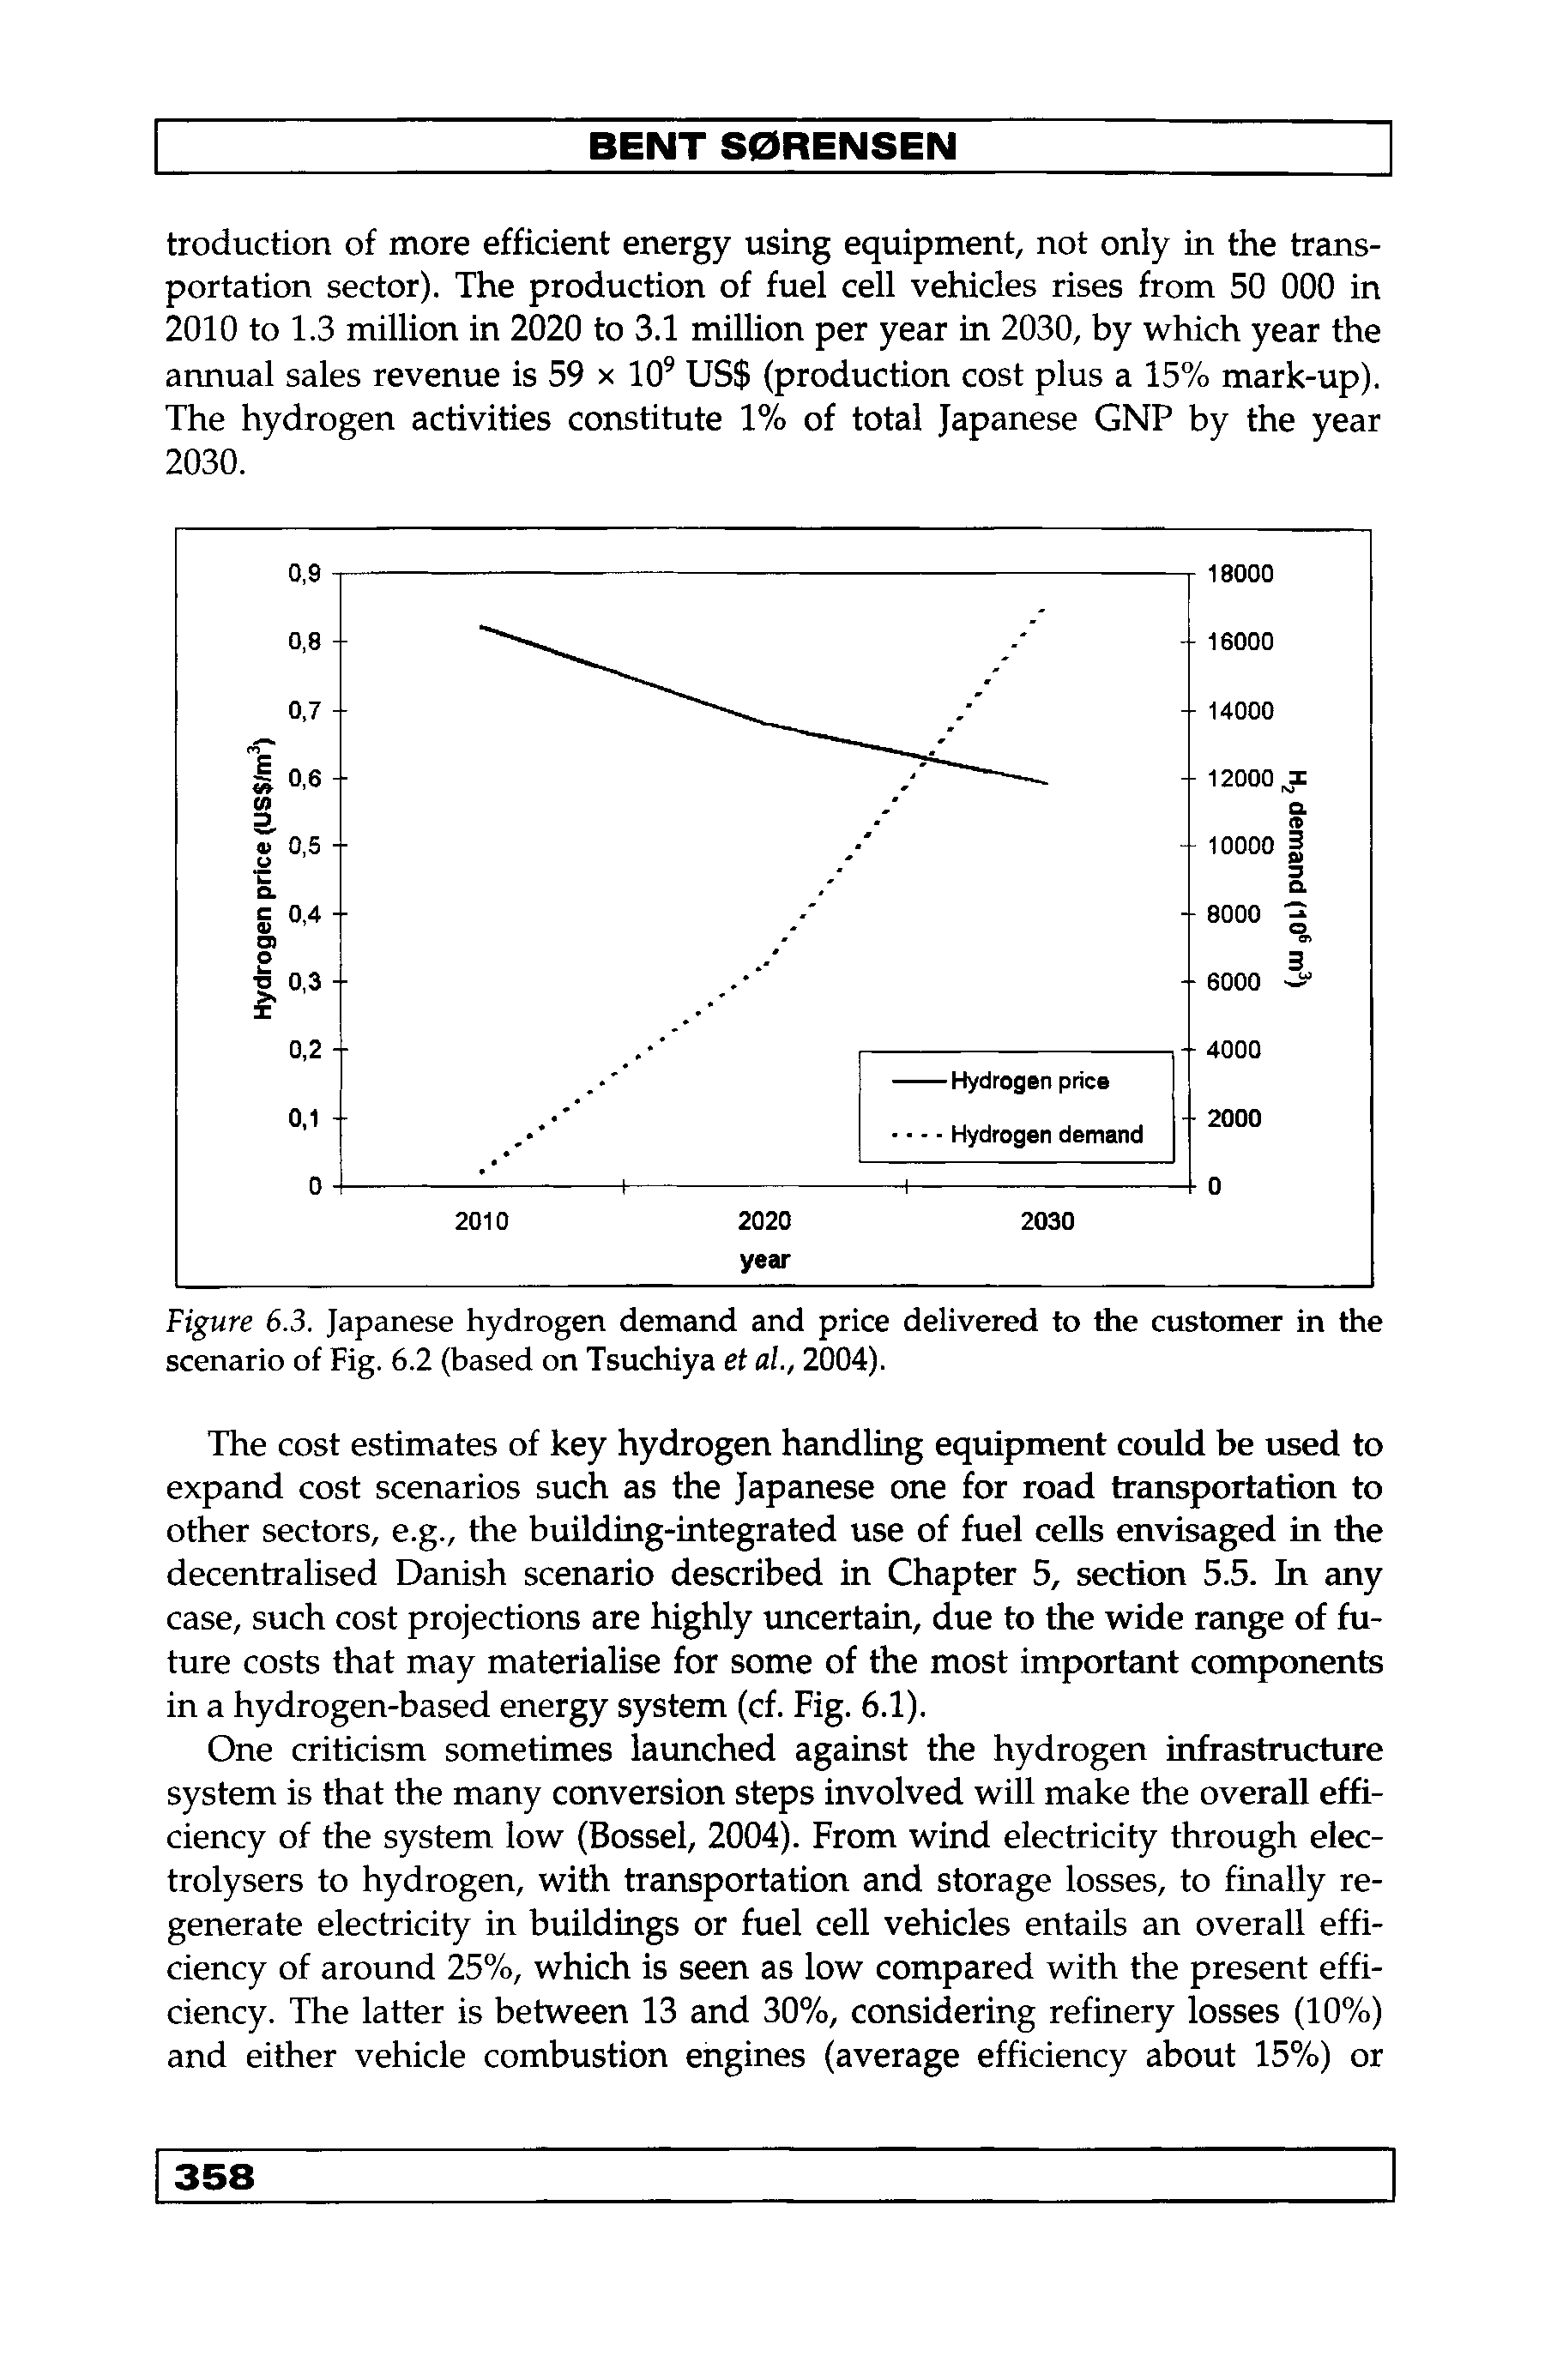 Figure 6.3. Japanese hydrogen demand and price delivered to the customer in the scenario of Fig. 6.2 (based on Tsuchiya et ai, 2004).